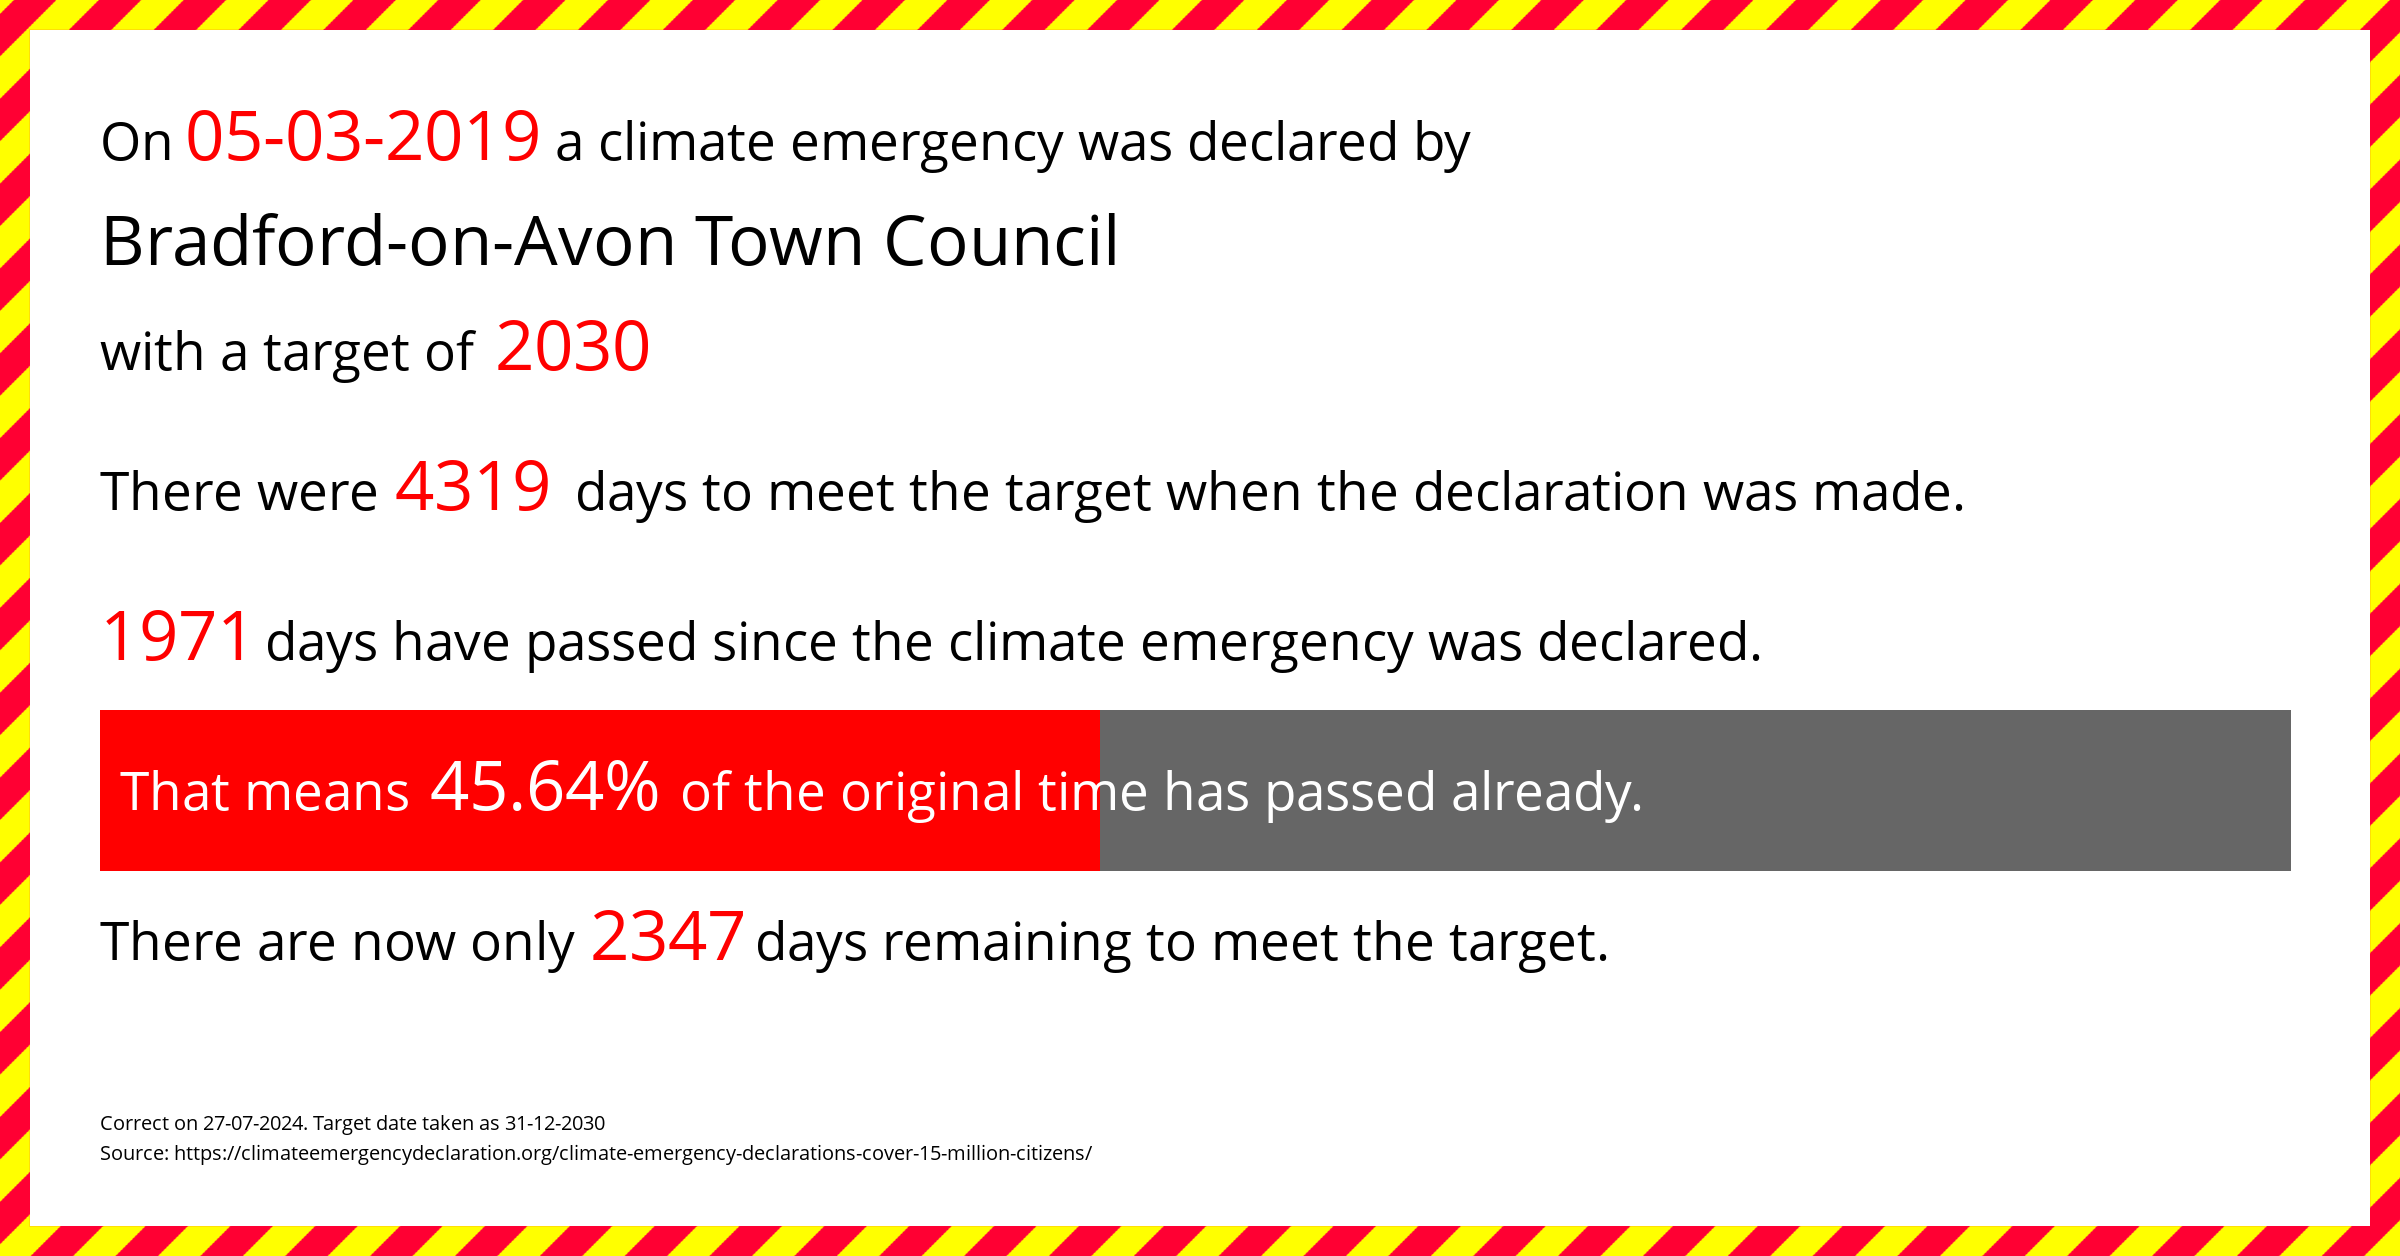 Bradford-on-Avon Town Council declared a Climate emergency on Tuesday 5th March 2019, with a target of 2030.